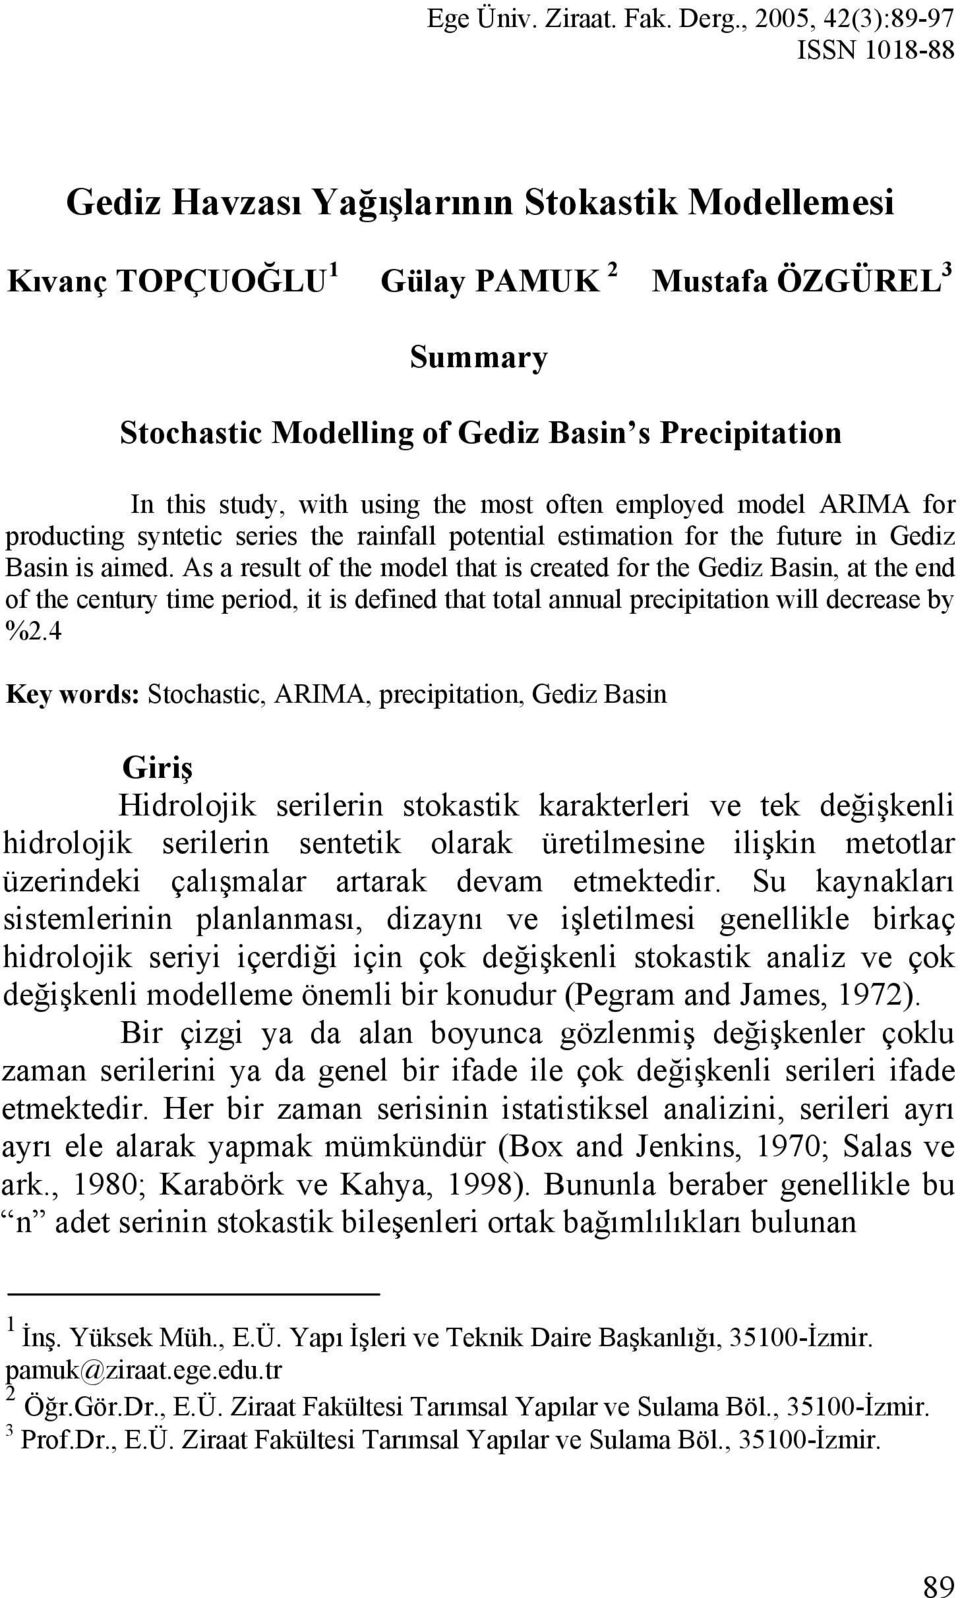 most often employed model ARIMA for producting syntetic series the rainfall potential estimation for the future in Gediz Basin is aimed.